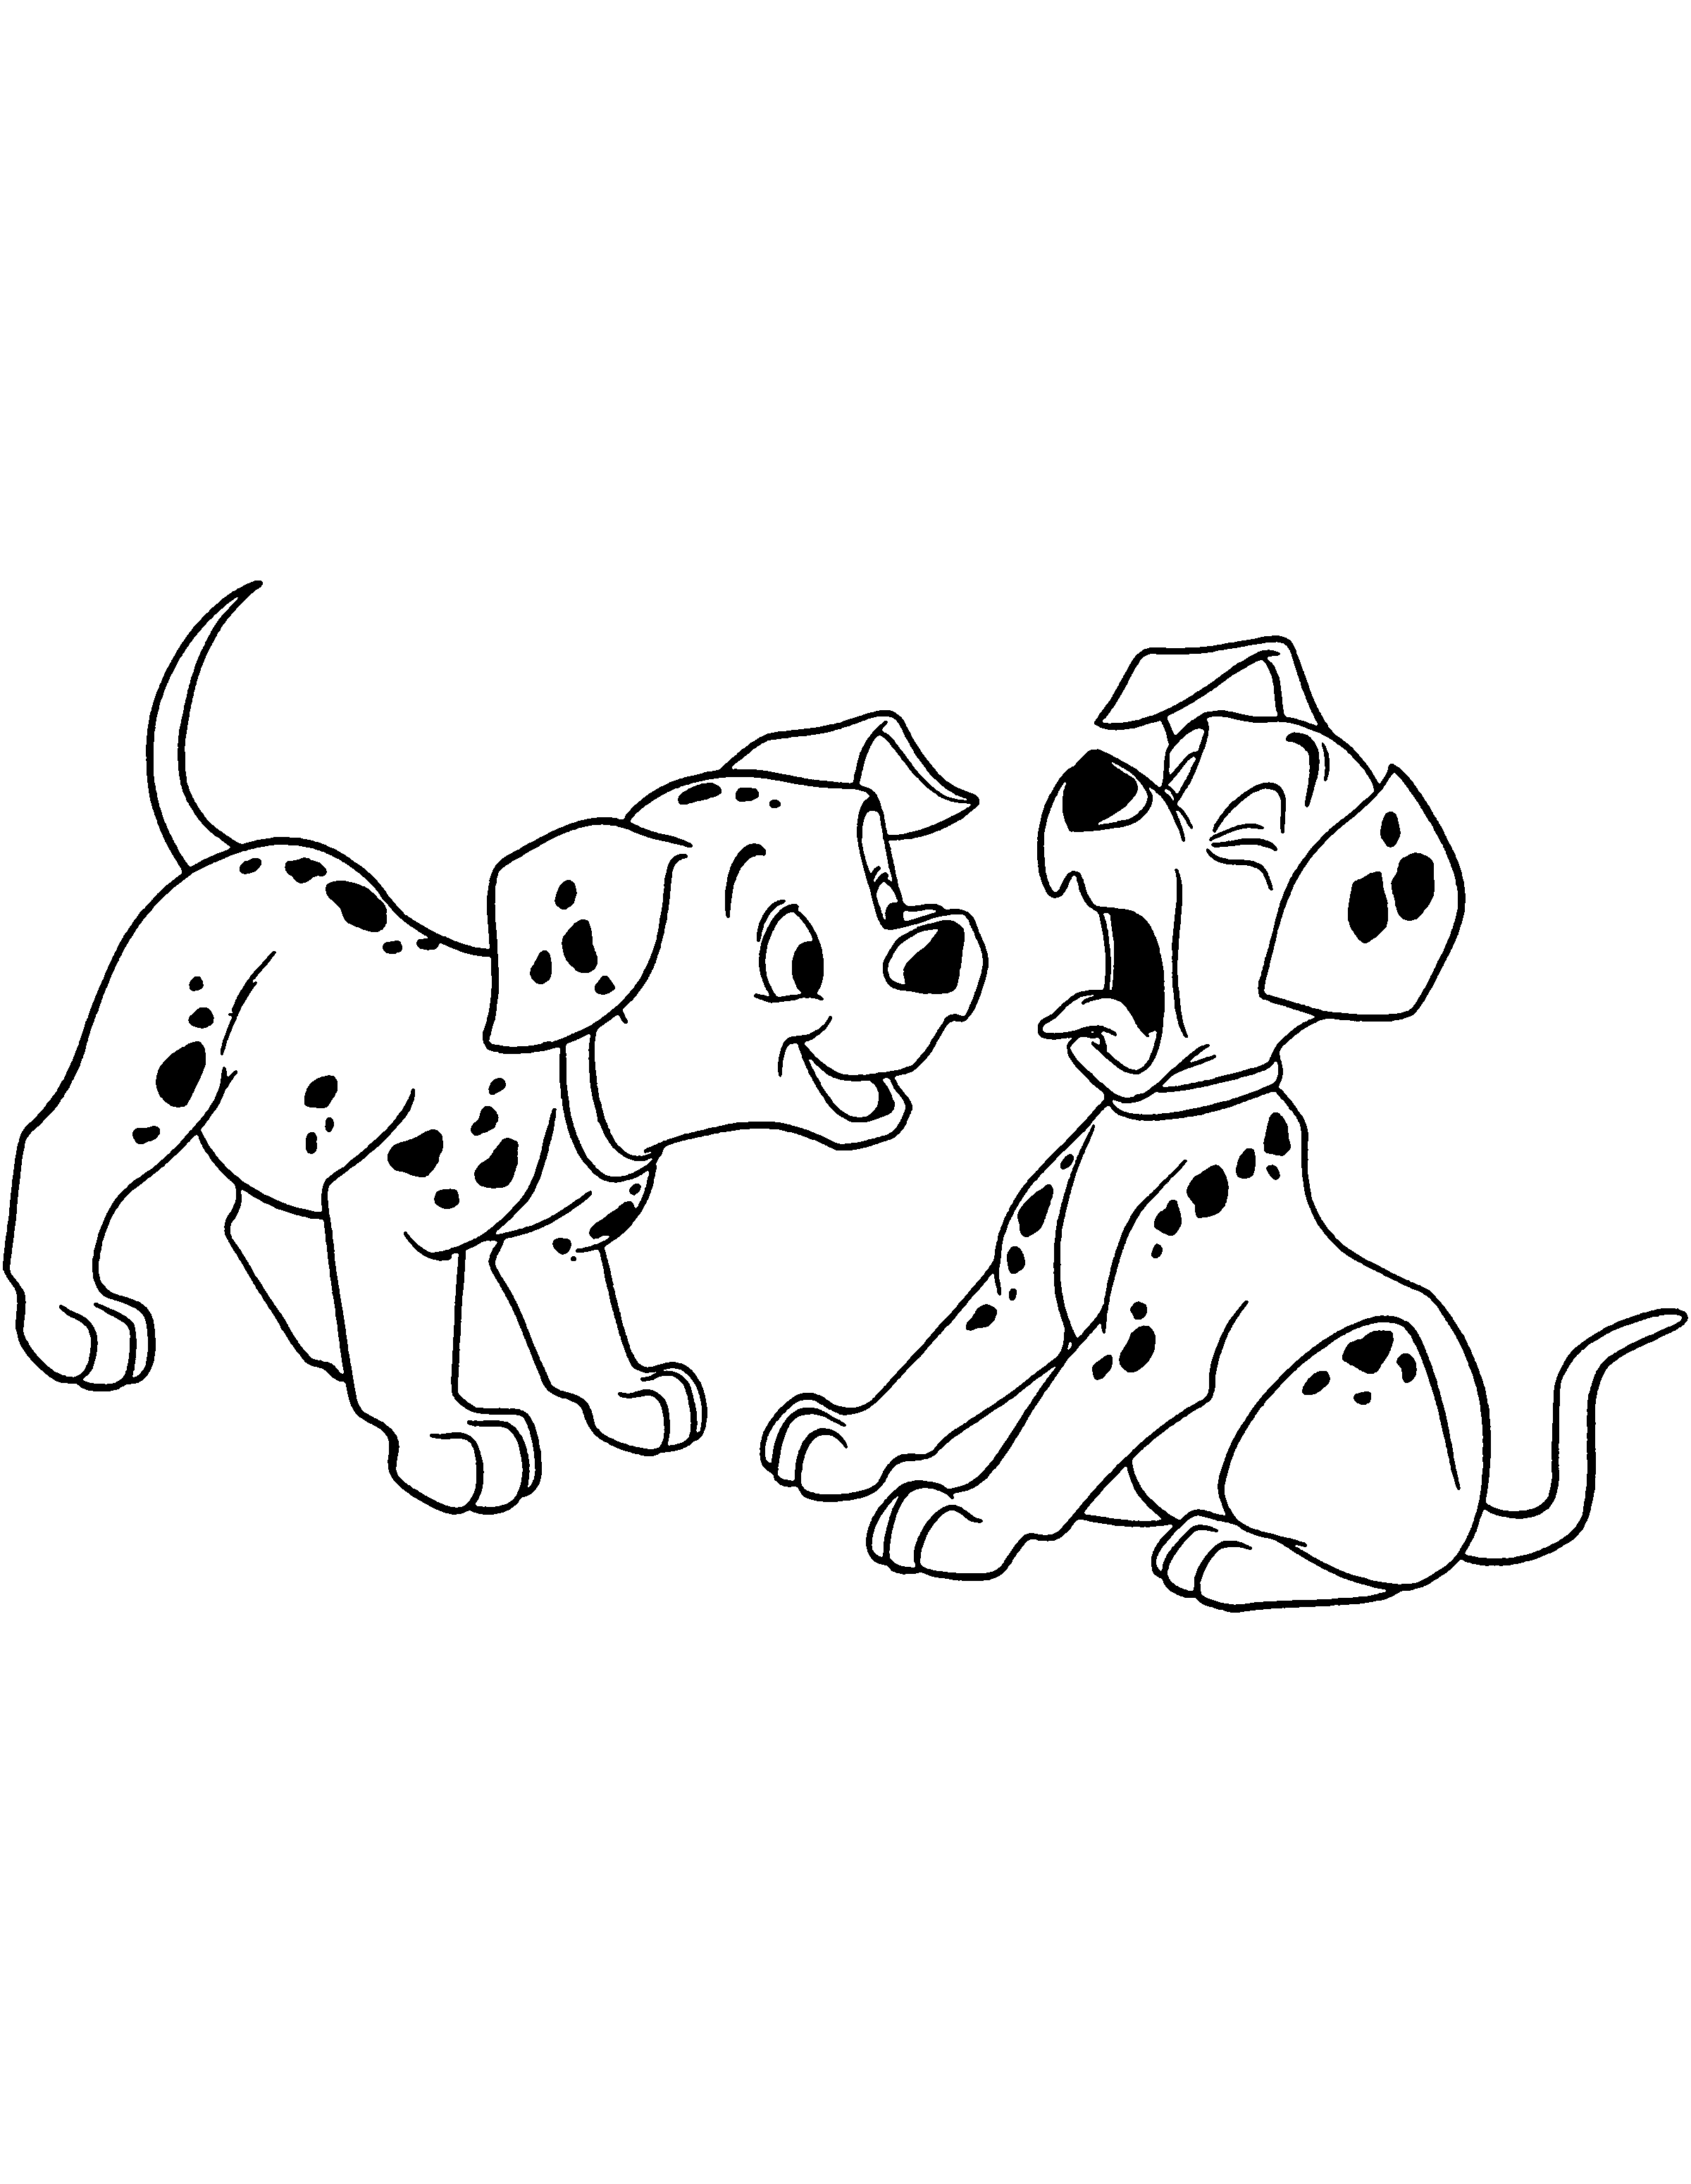  Two dogs Coloring pages Â» 102 dalmatians Coloring pages